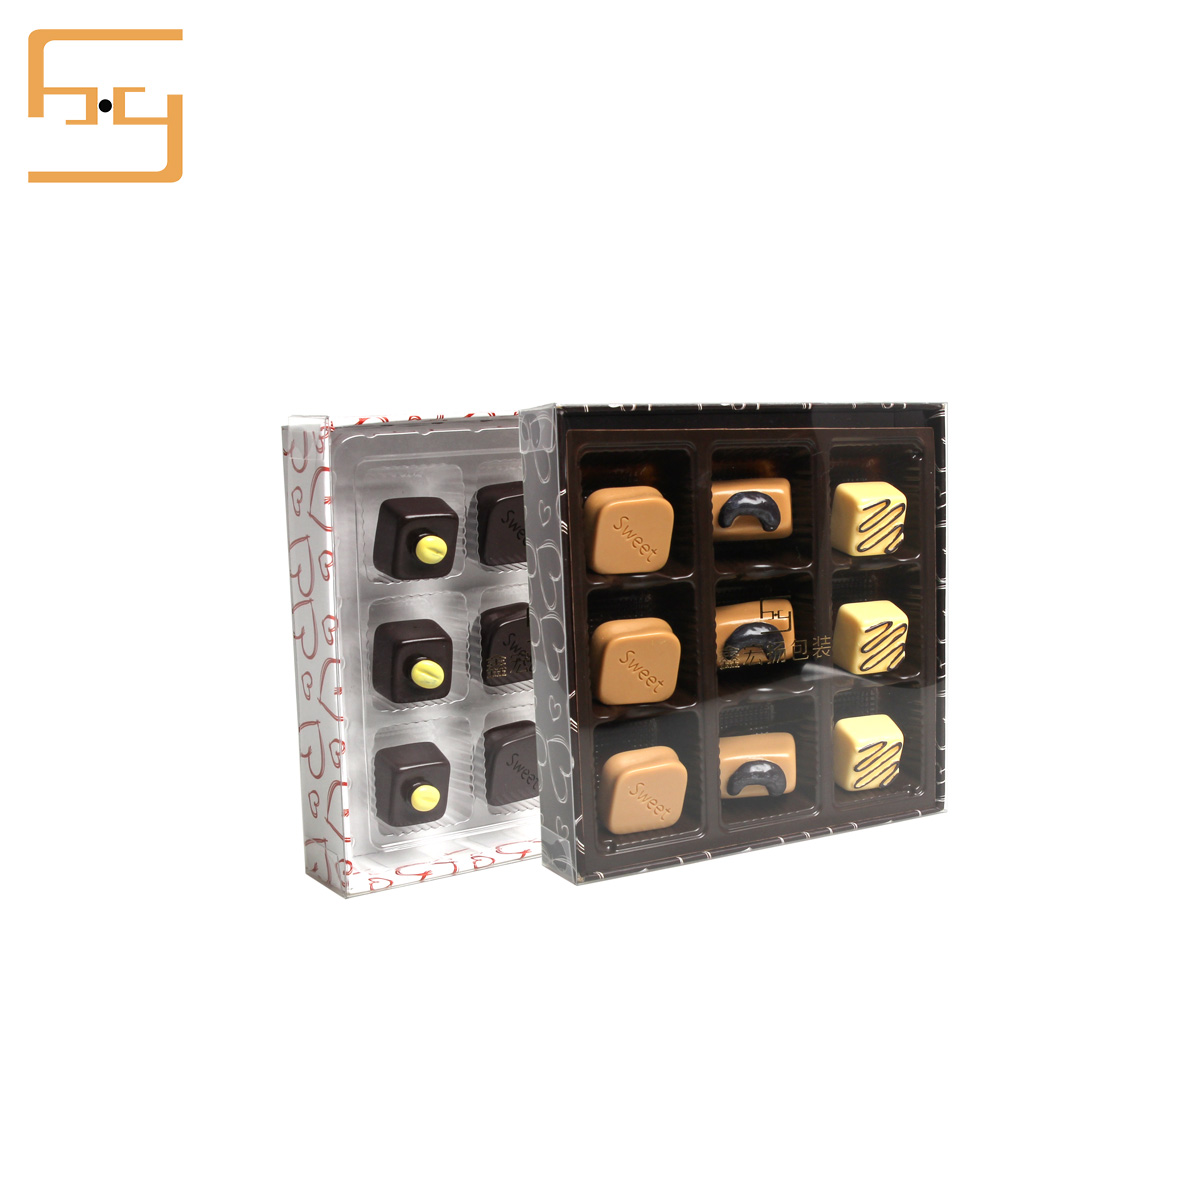 Square plastic Chocolate Blisters Packaging And Insert Candy Vac Form Plastic Tray